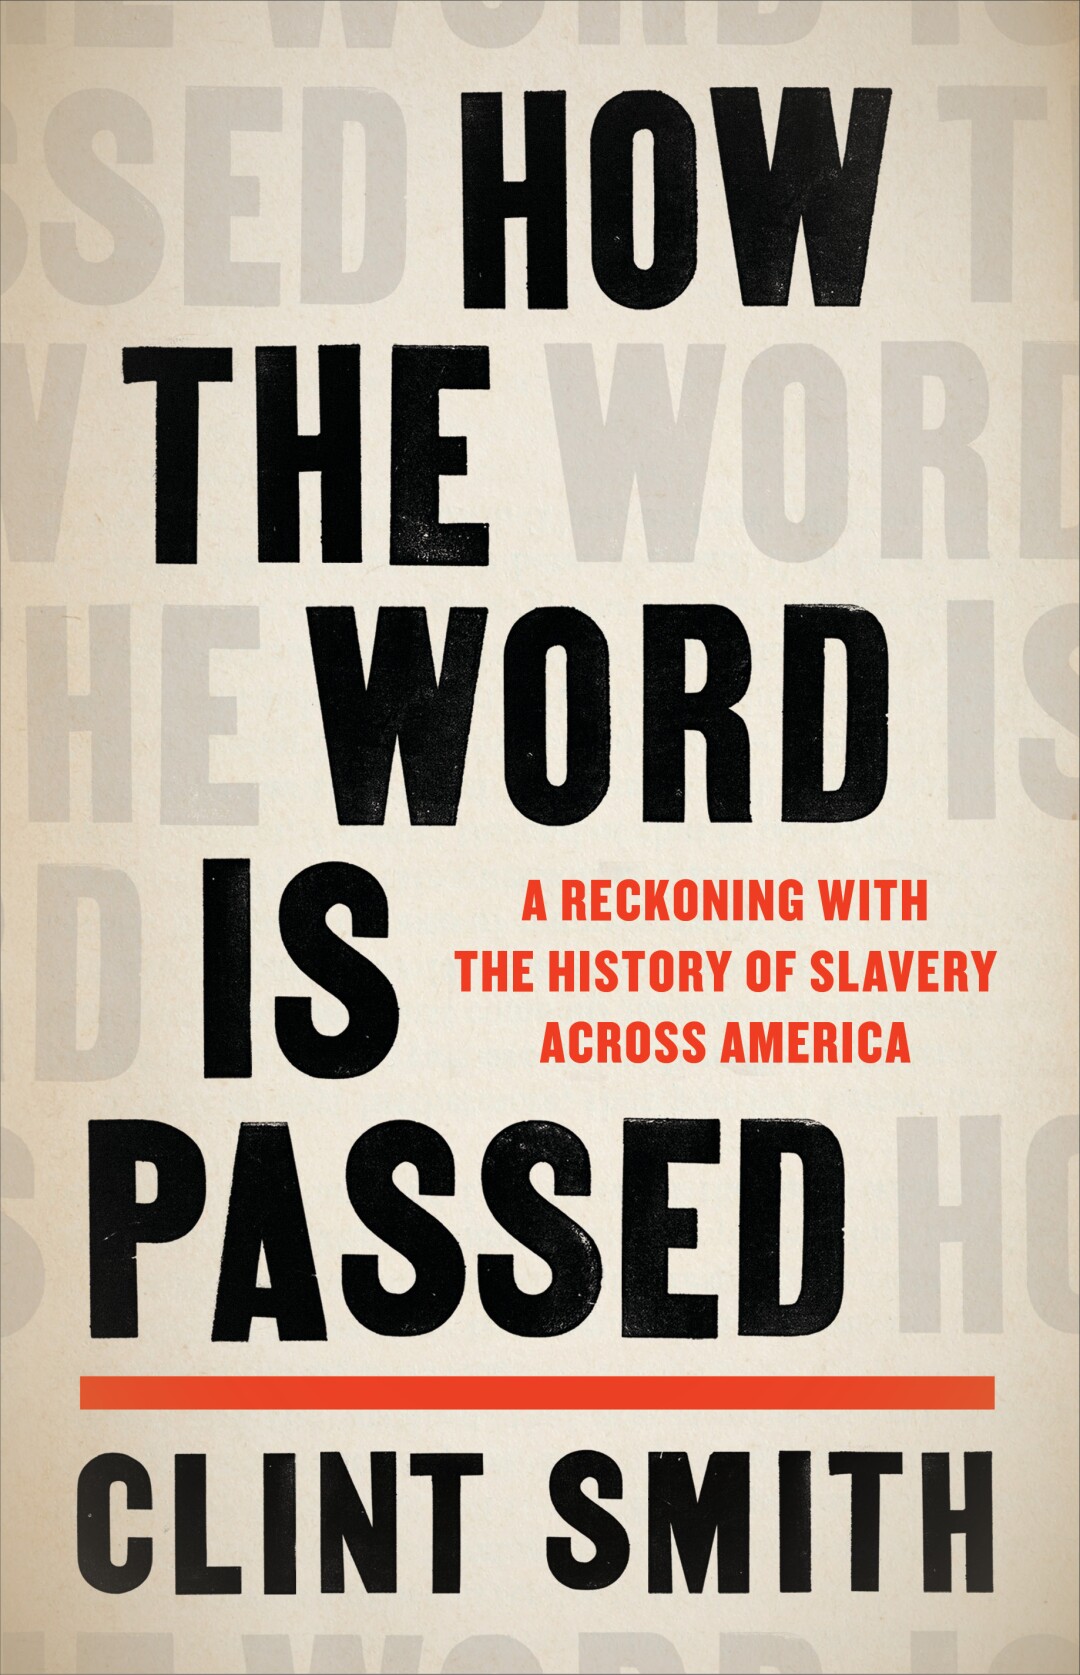 The cover of "How the Word is Passed," by Clint Smith.